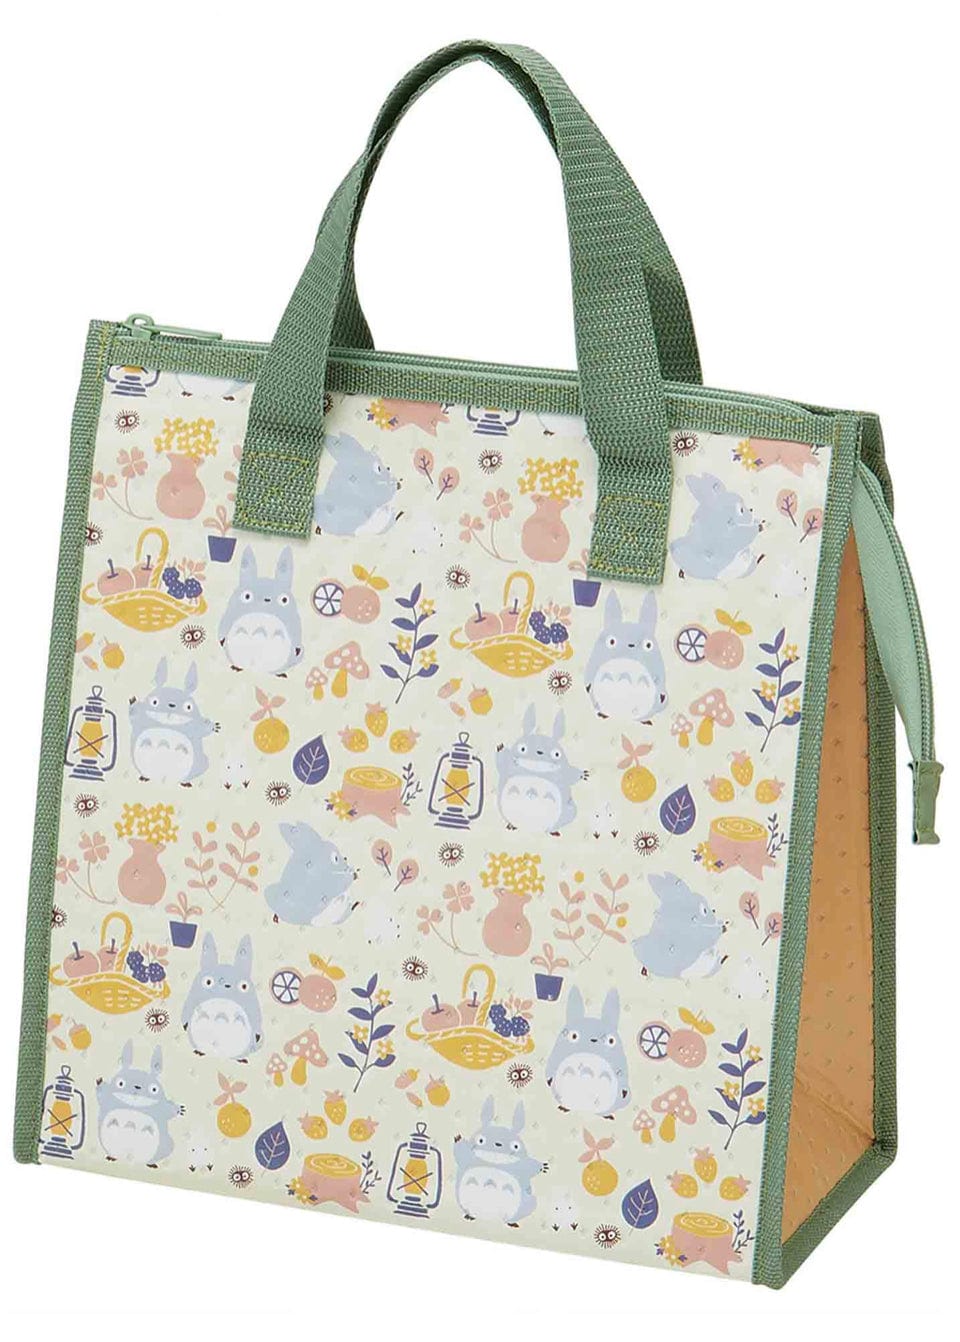 Clever Idiots MY NEIGHBOR TOTORO: INSULATED LUNCH BAG (FORAGING) Kawaii Gifts 4973307484995